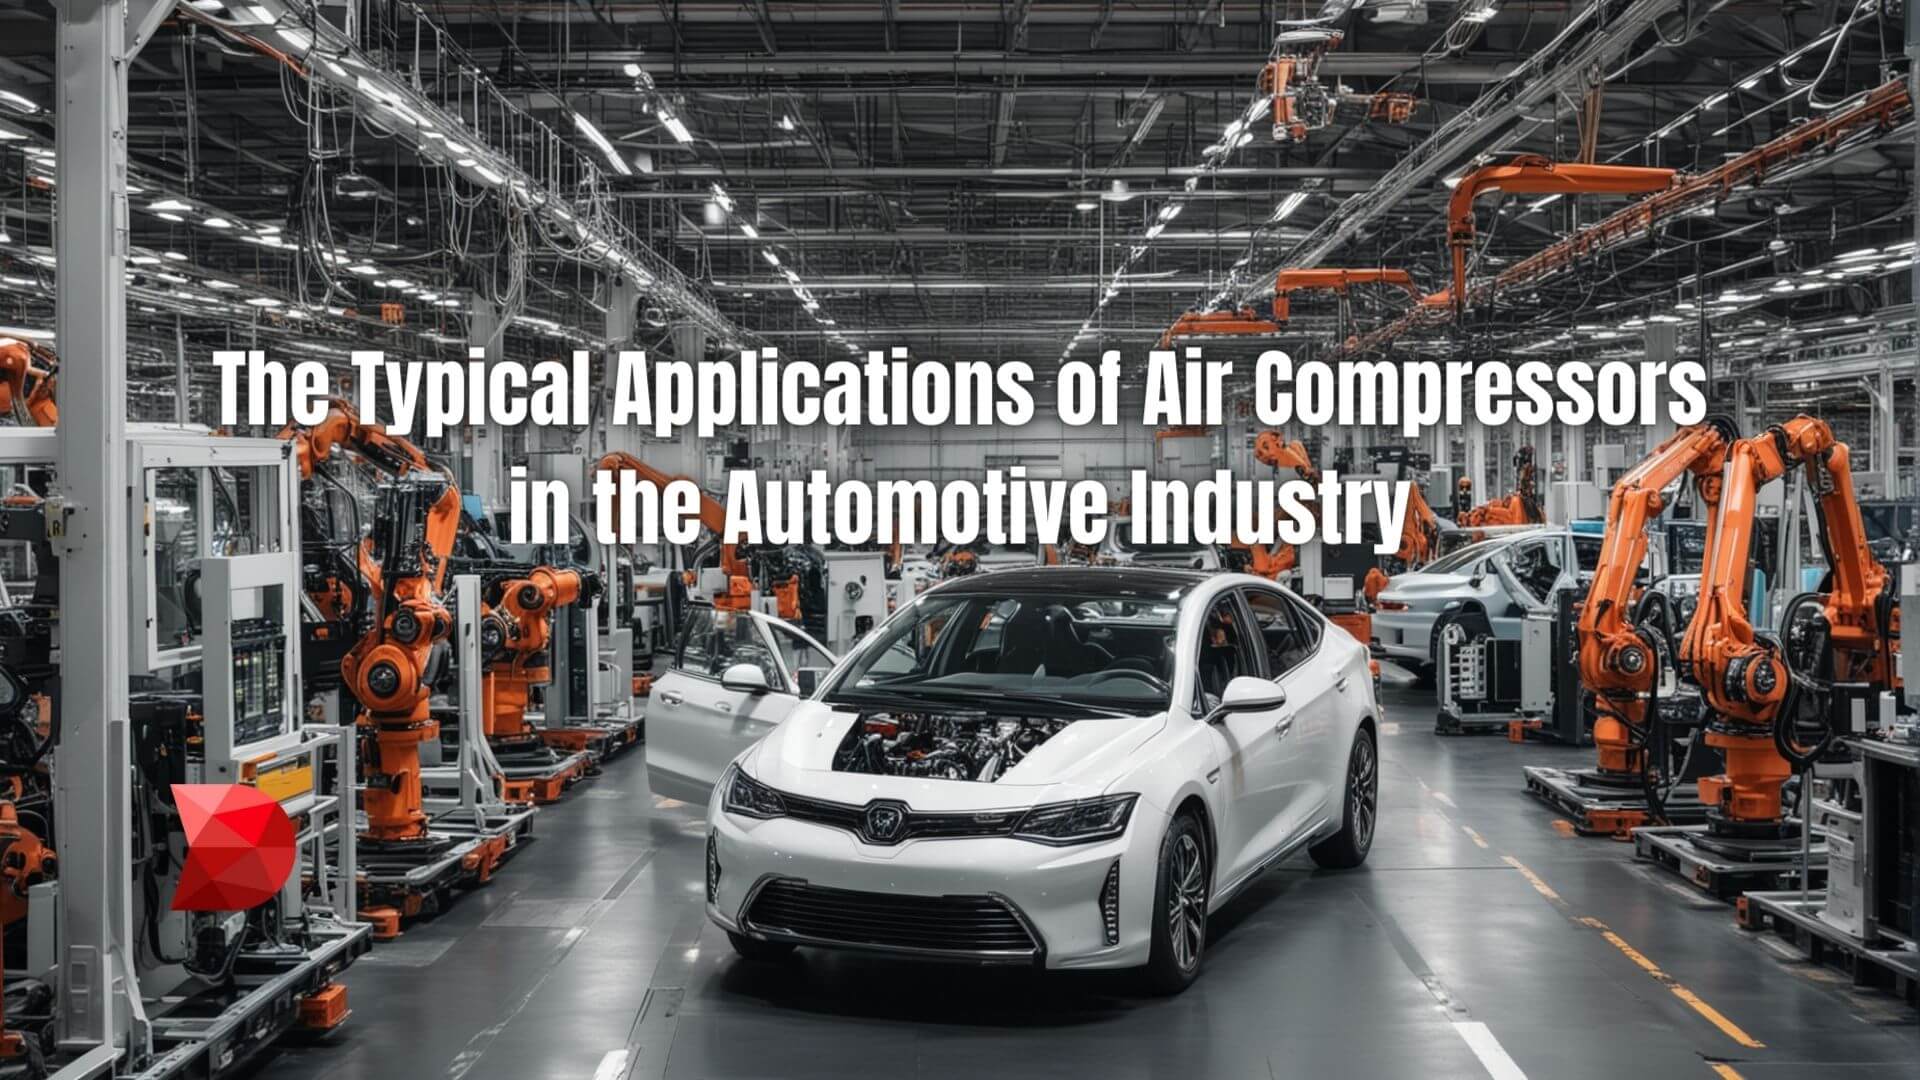 Unlock the potential of air compressors in cars! Click here to explore their diverse applications in the automotive industry.